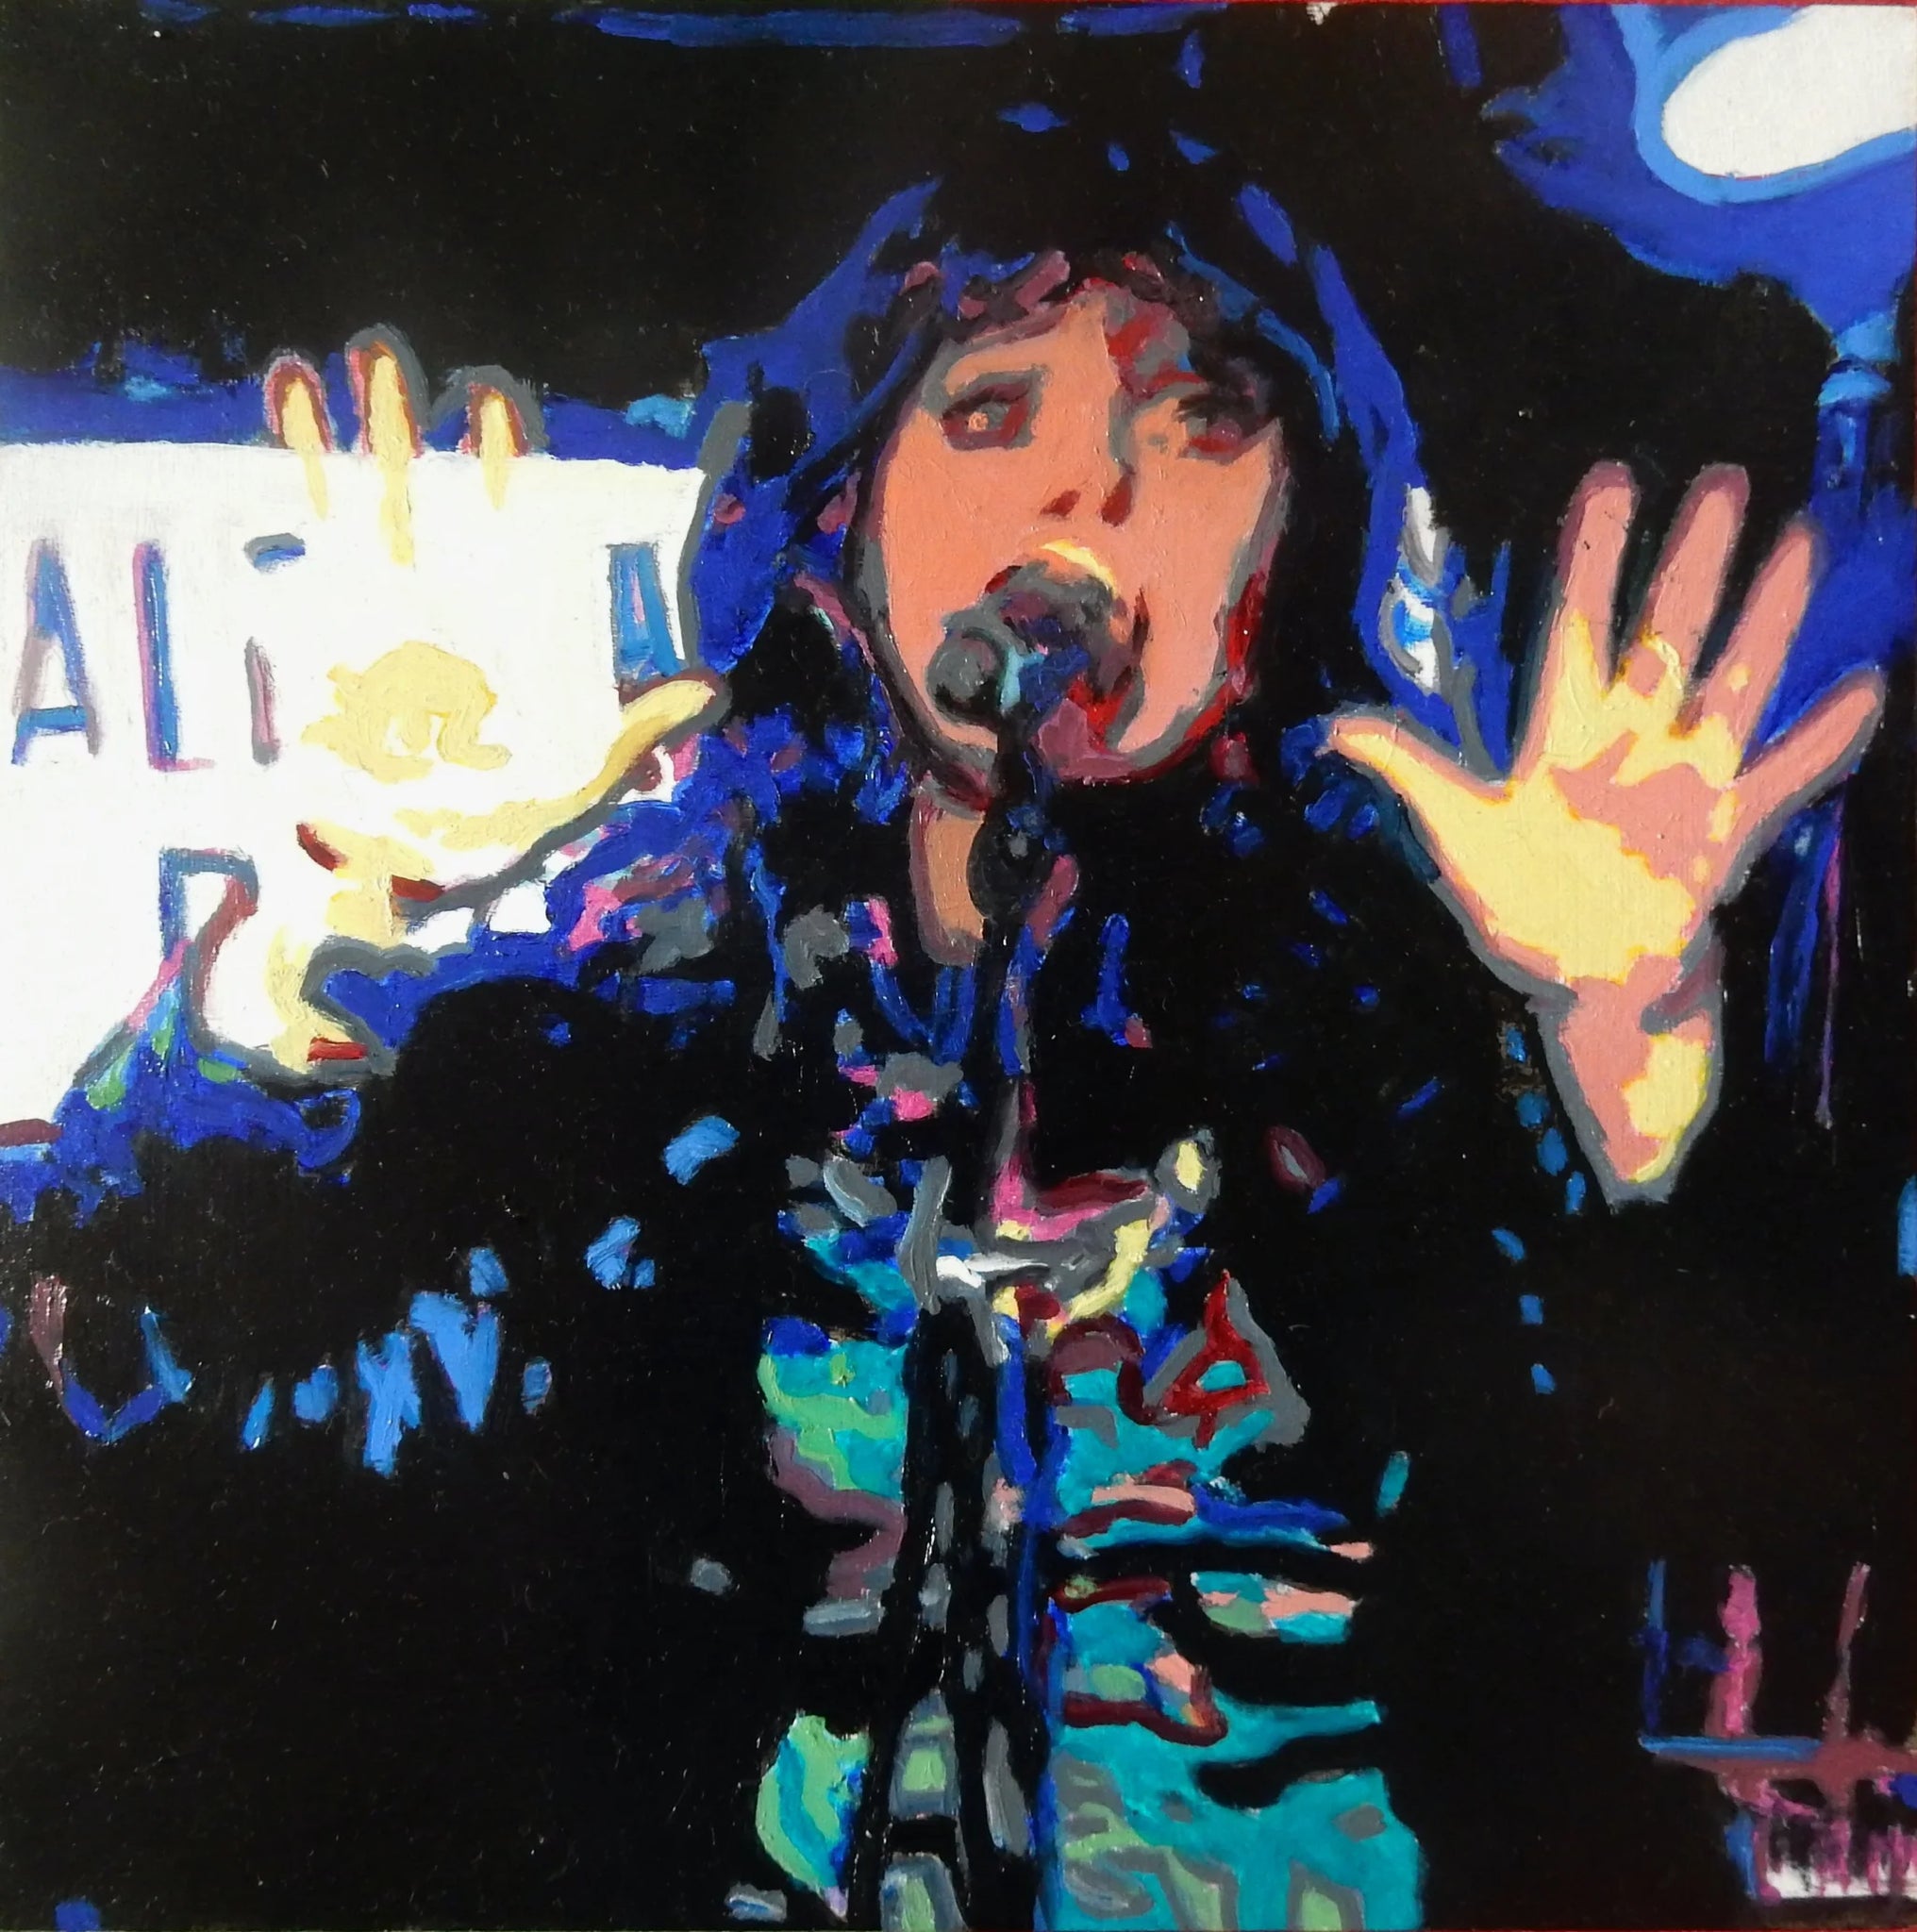 Cloudbusting Kate Bush tribute band at the Half Moon Putney oil on cradled gesso panel by Stella Tooth artist